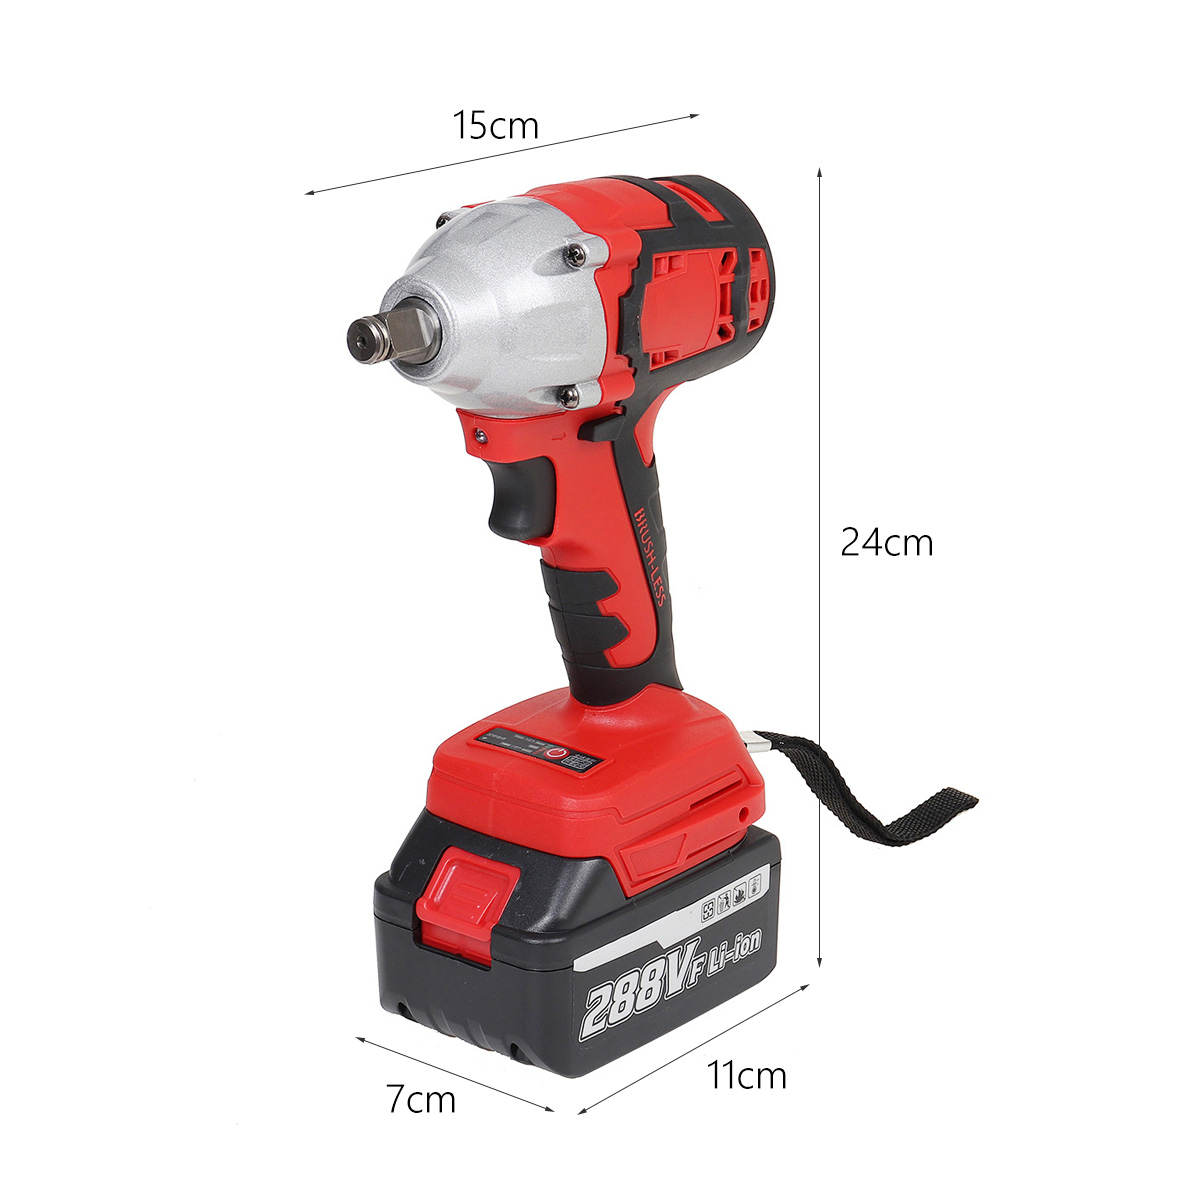 288VF-Adjustable-Speed-Brushless-Wrench-Cordless-Li-ion-Battery-Electrc-Wrench--With-LED-Light-1689704-8